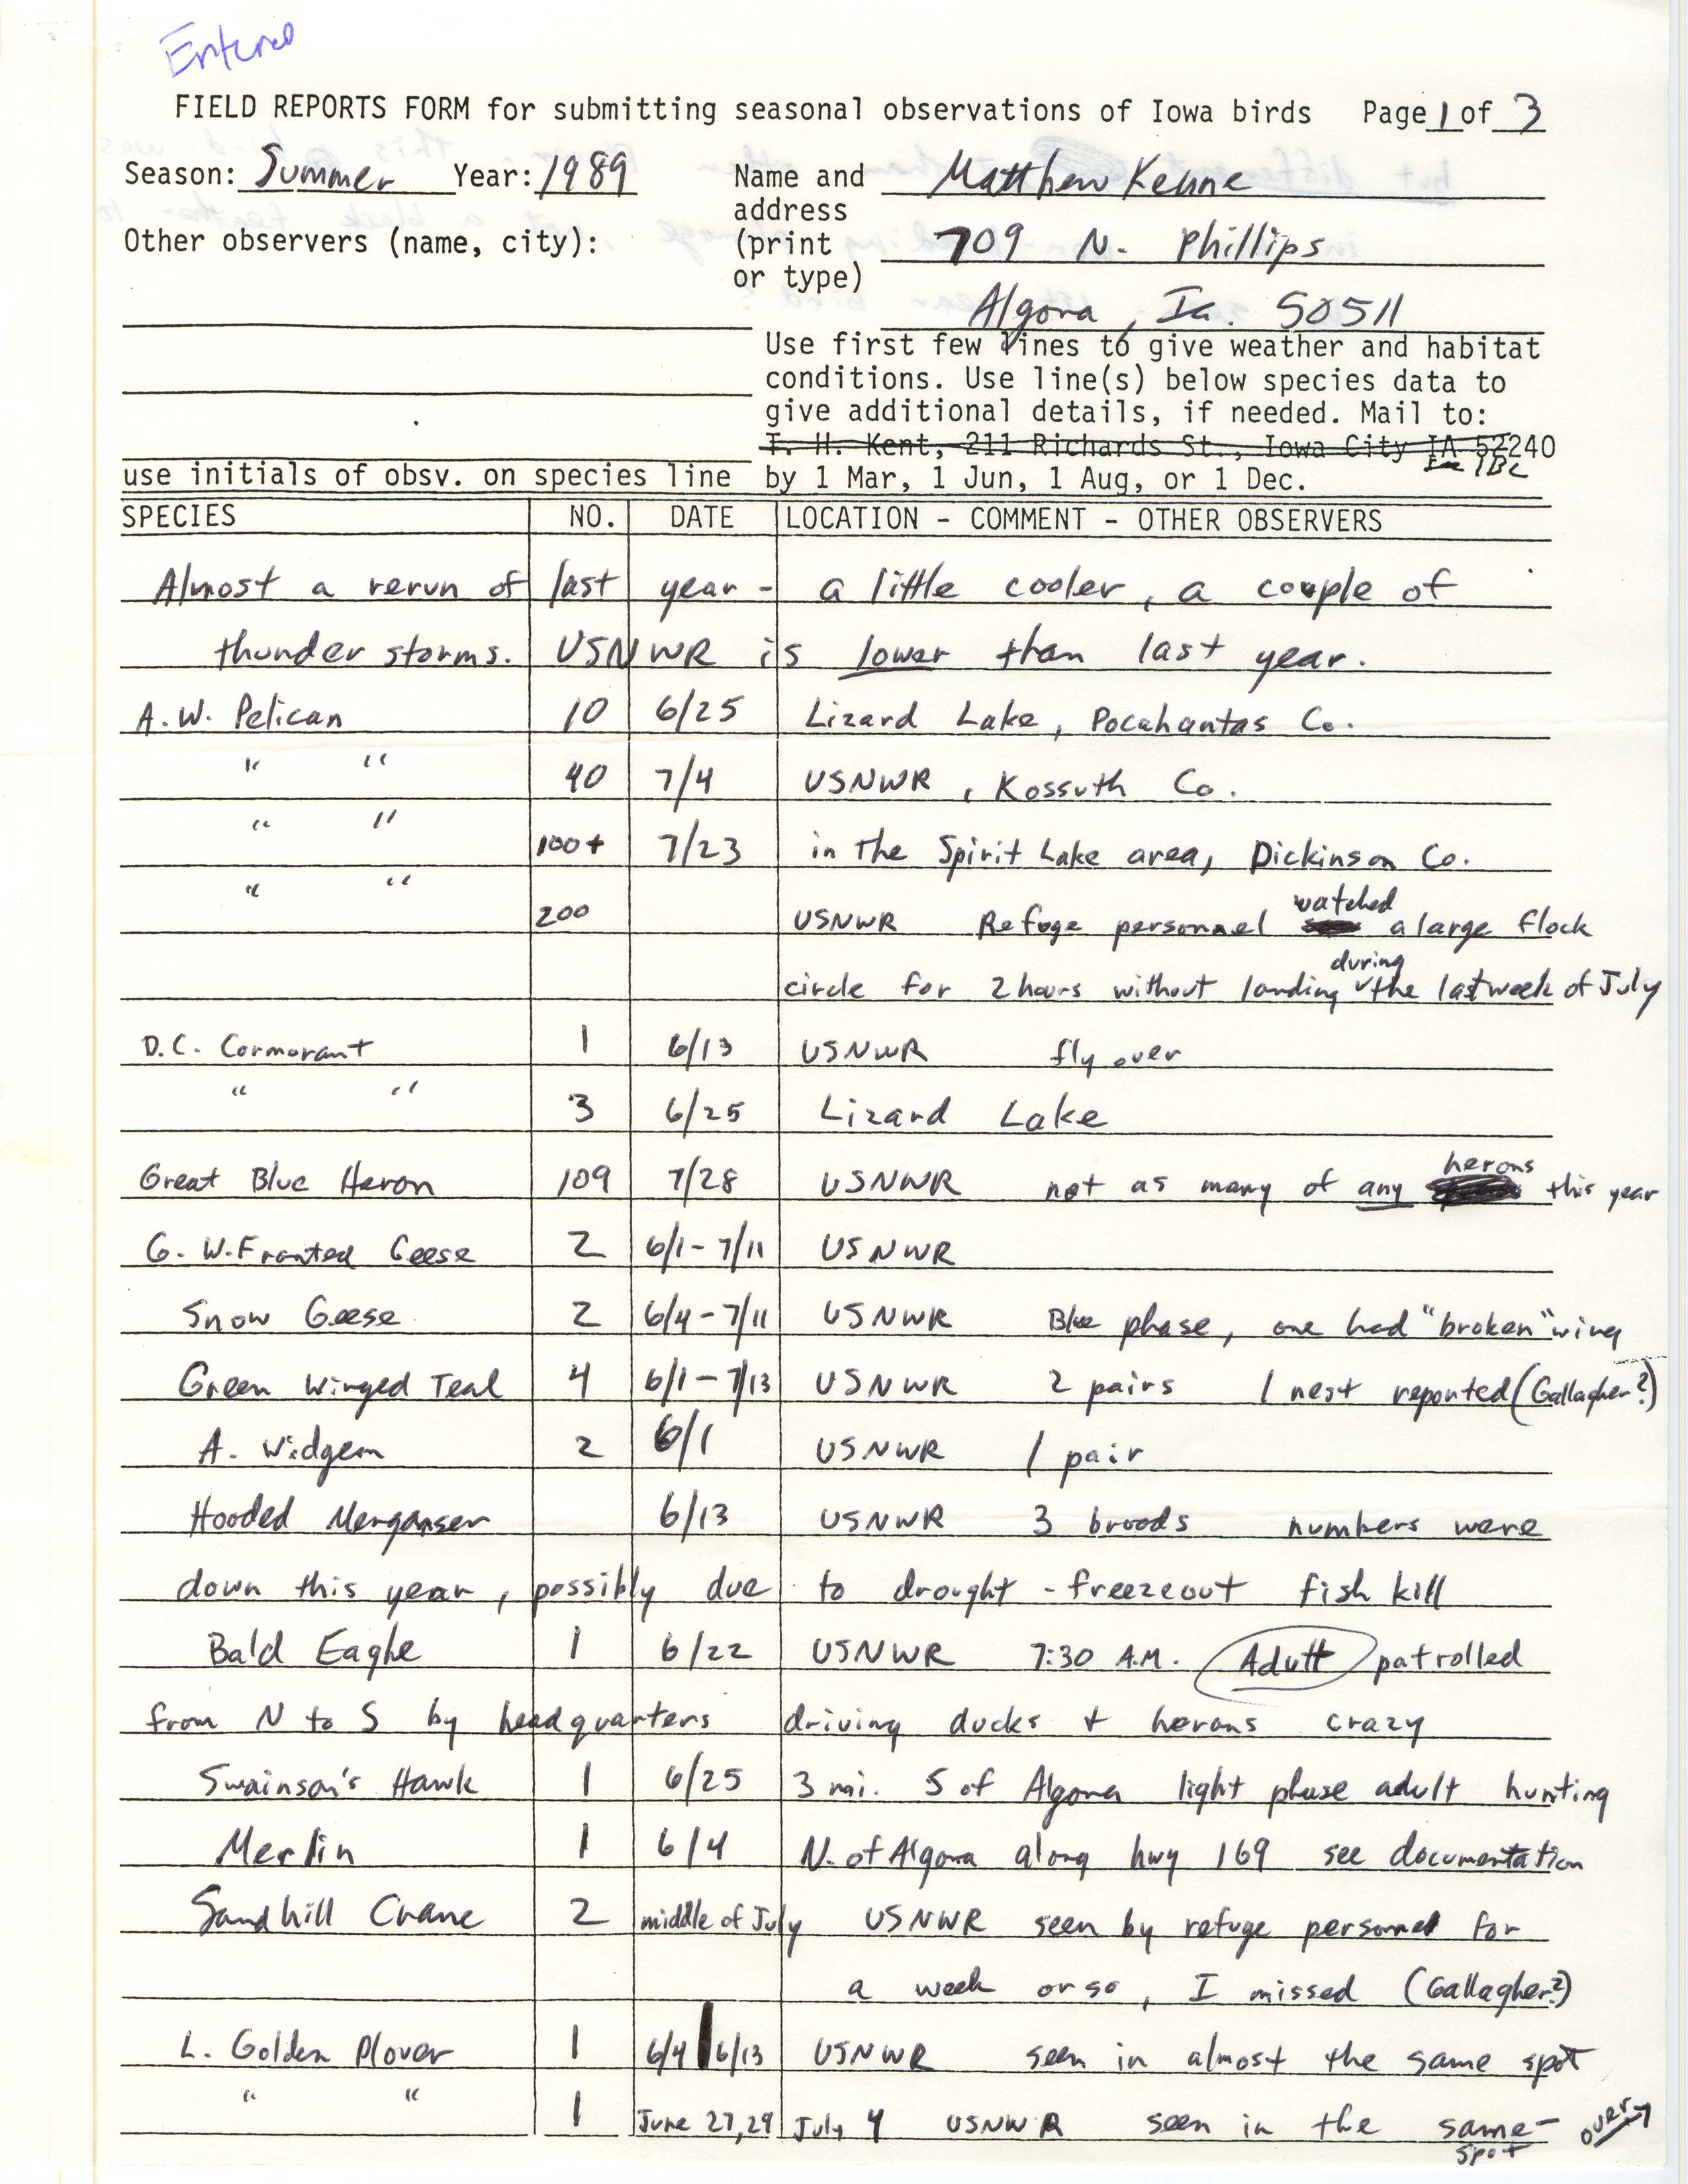 Field reports form for submitting seasonal observations of Iowa birds, Matthew Kenne, summer 1989